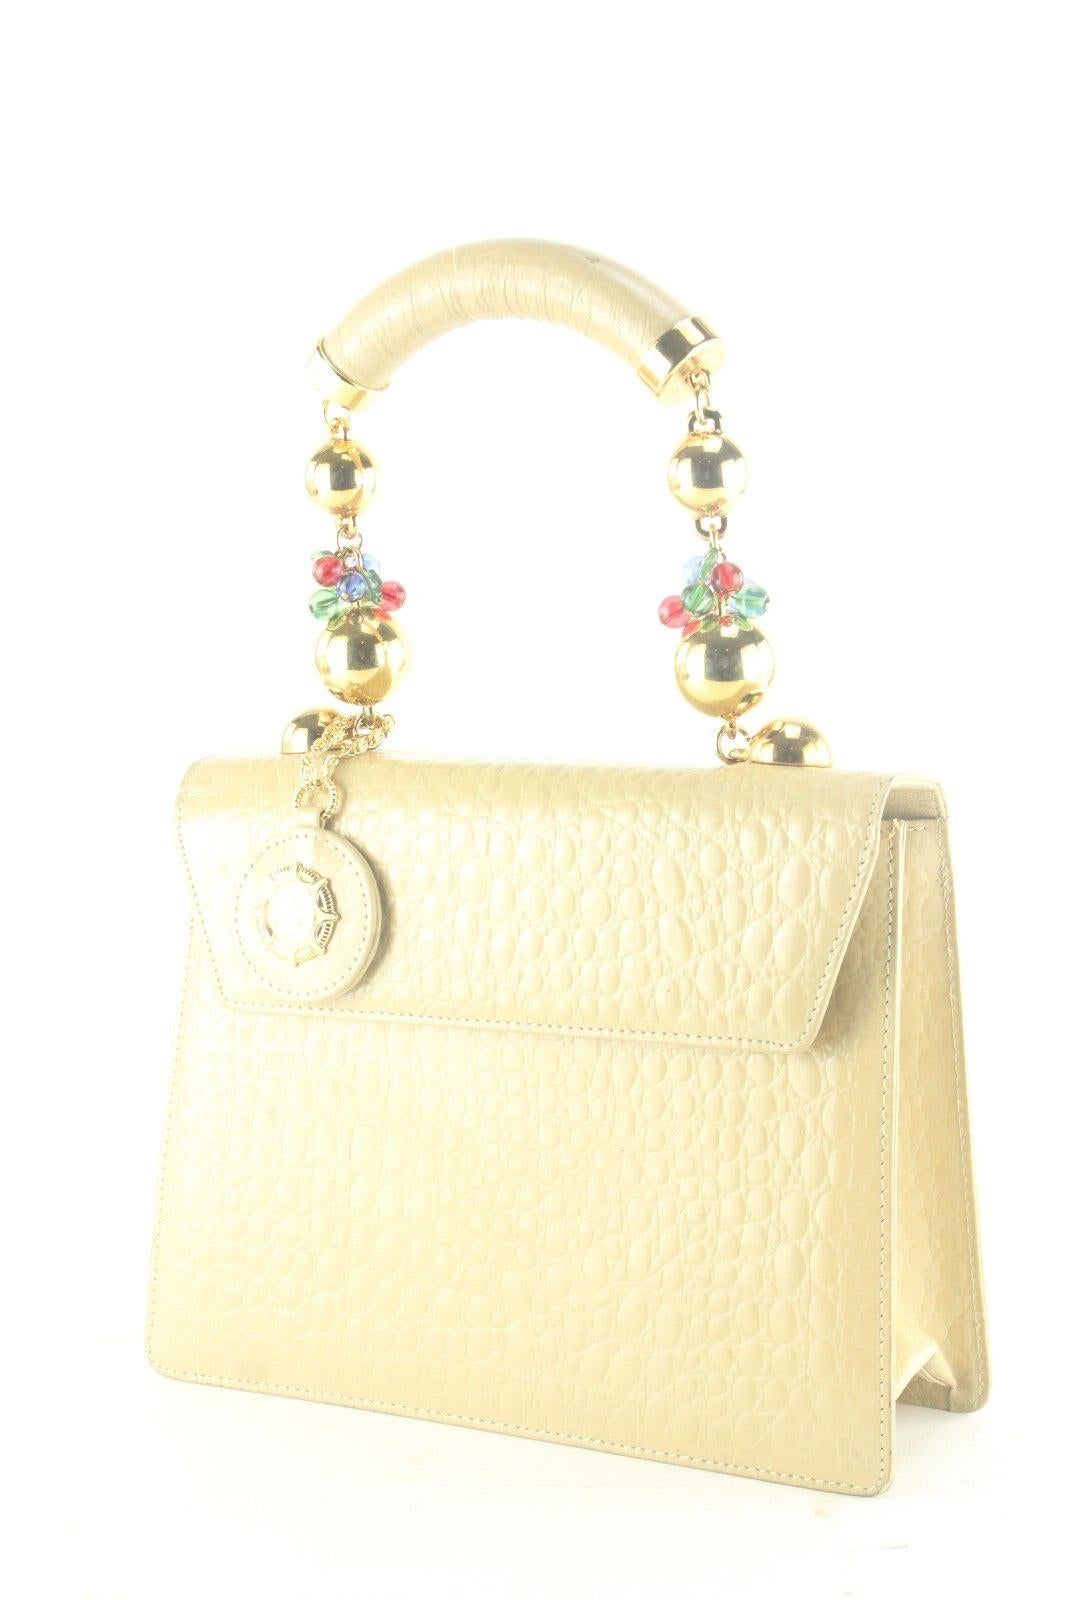 Versace Beige Leather Stone Chain Top Handle Bag 1VER105K For Sale 8